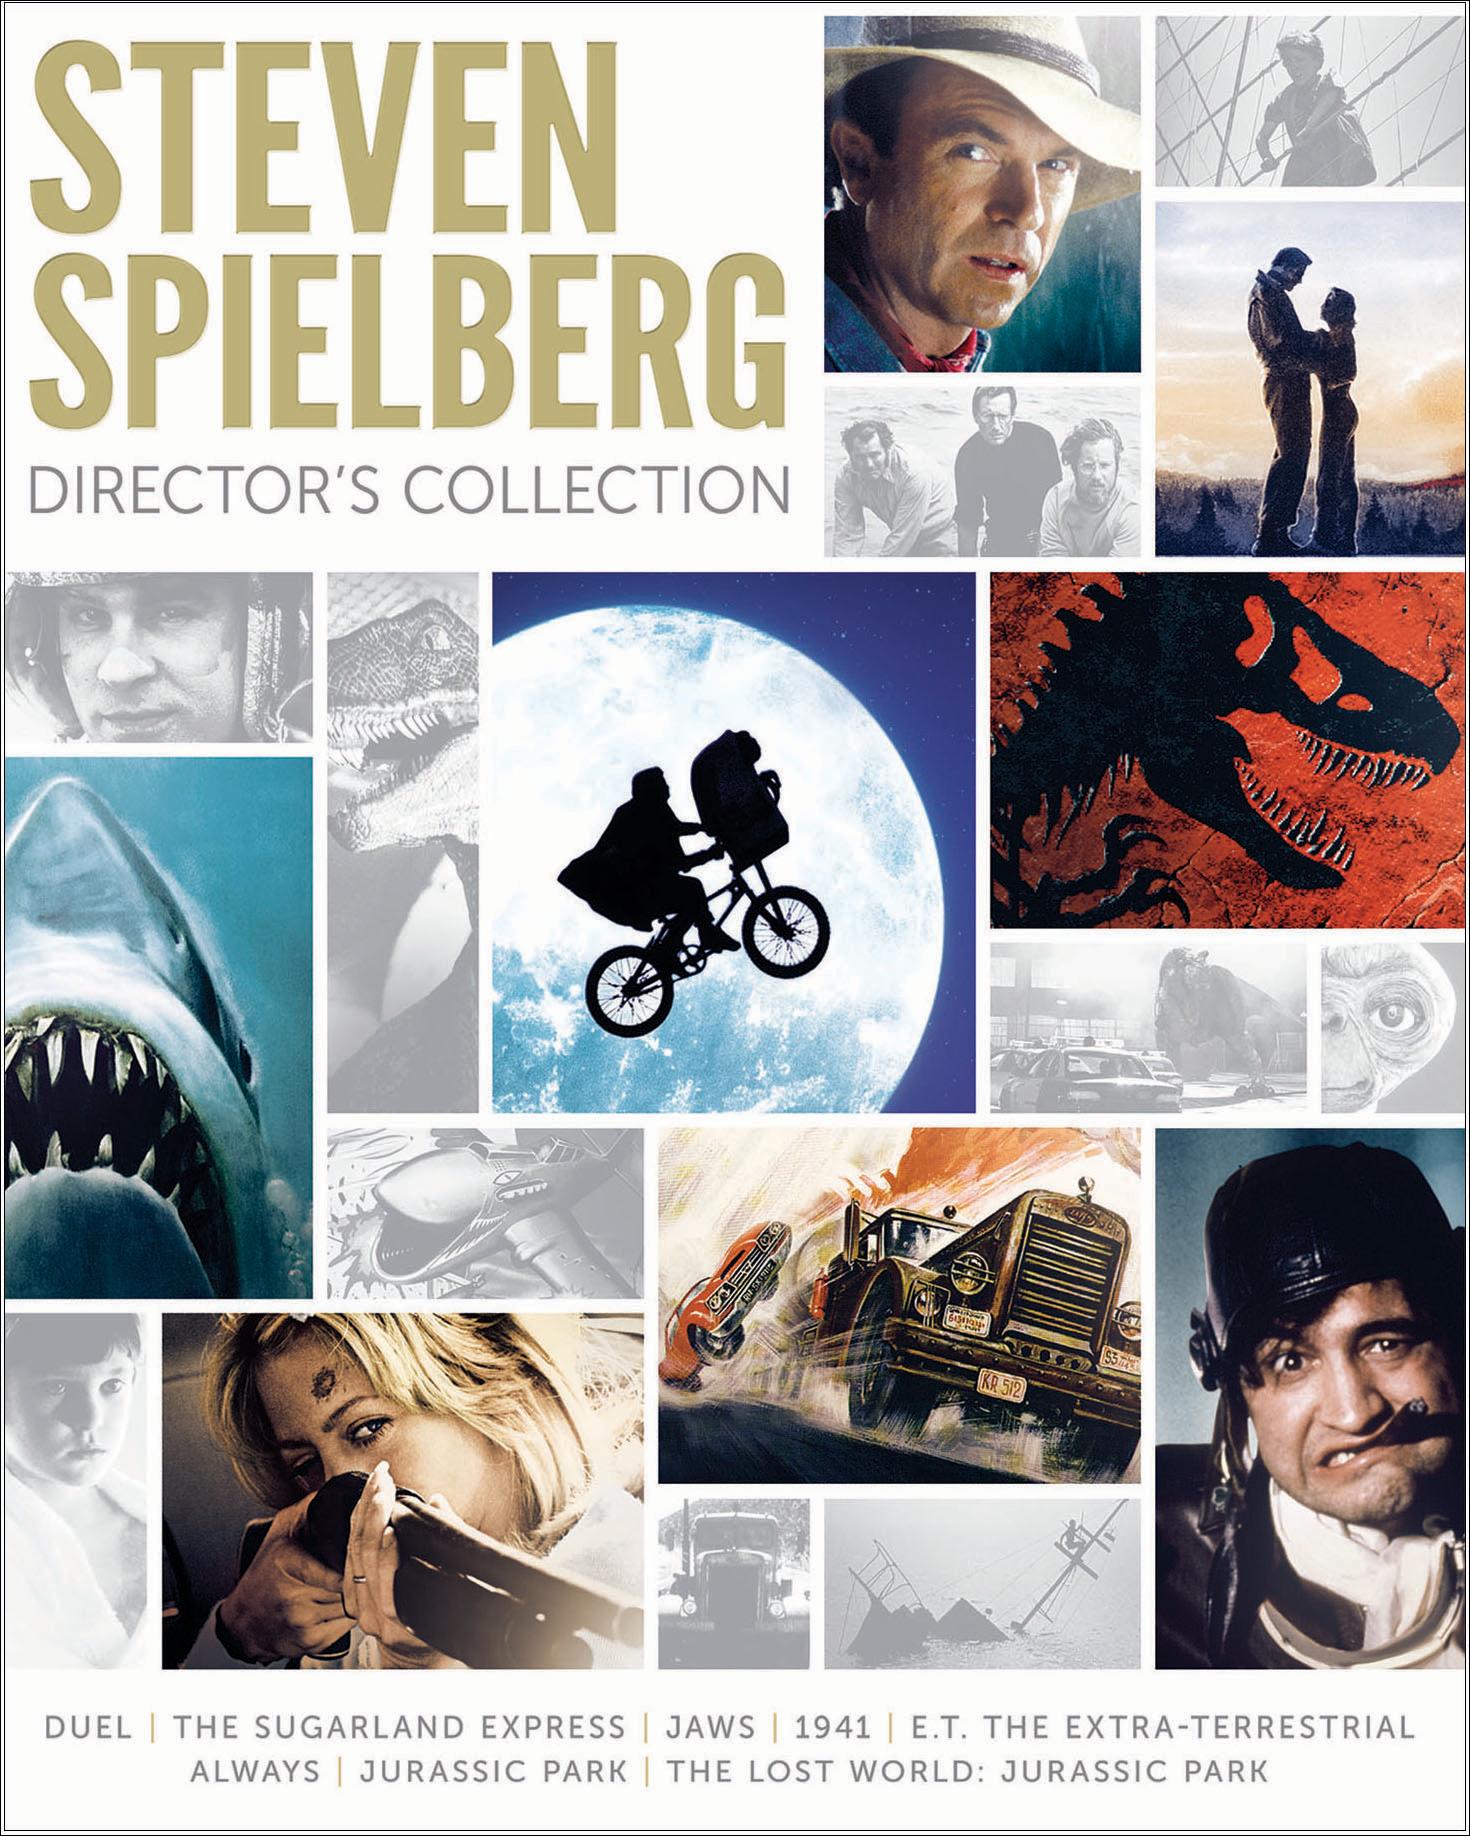 Steven Spielberg Director's Collection (Box Set) - Blu-ray   - Modern Classic Movies On Blu-ray - Movies On GRUV